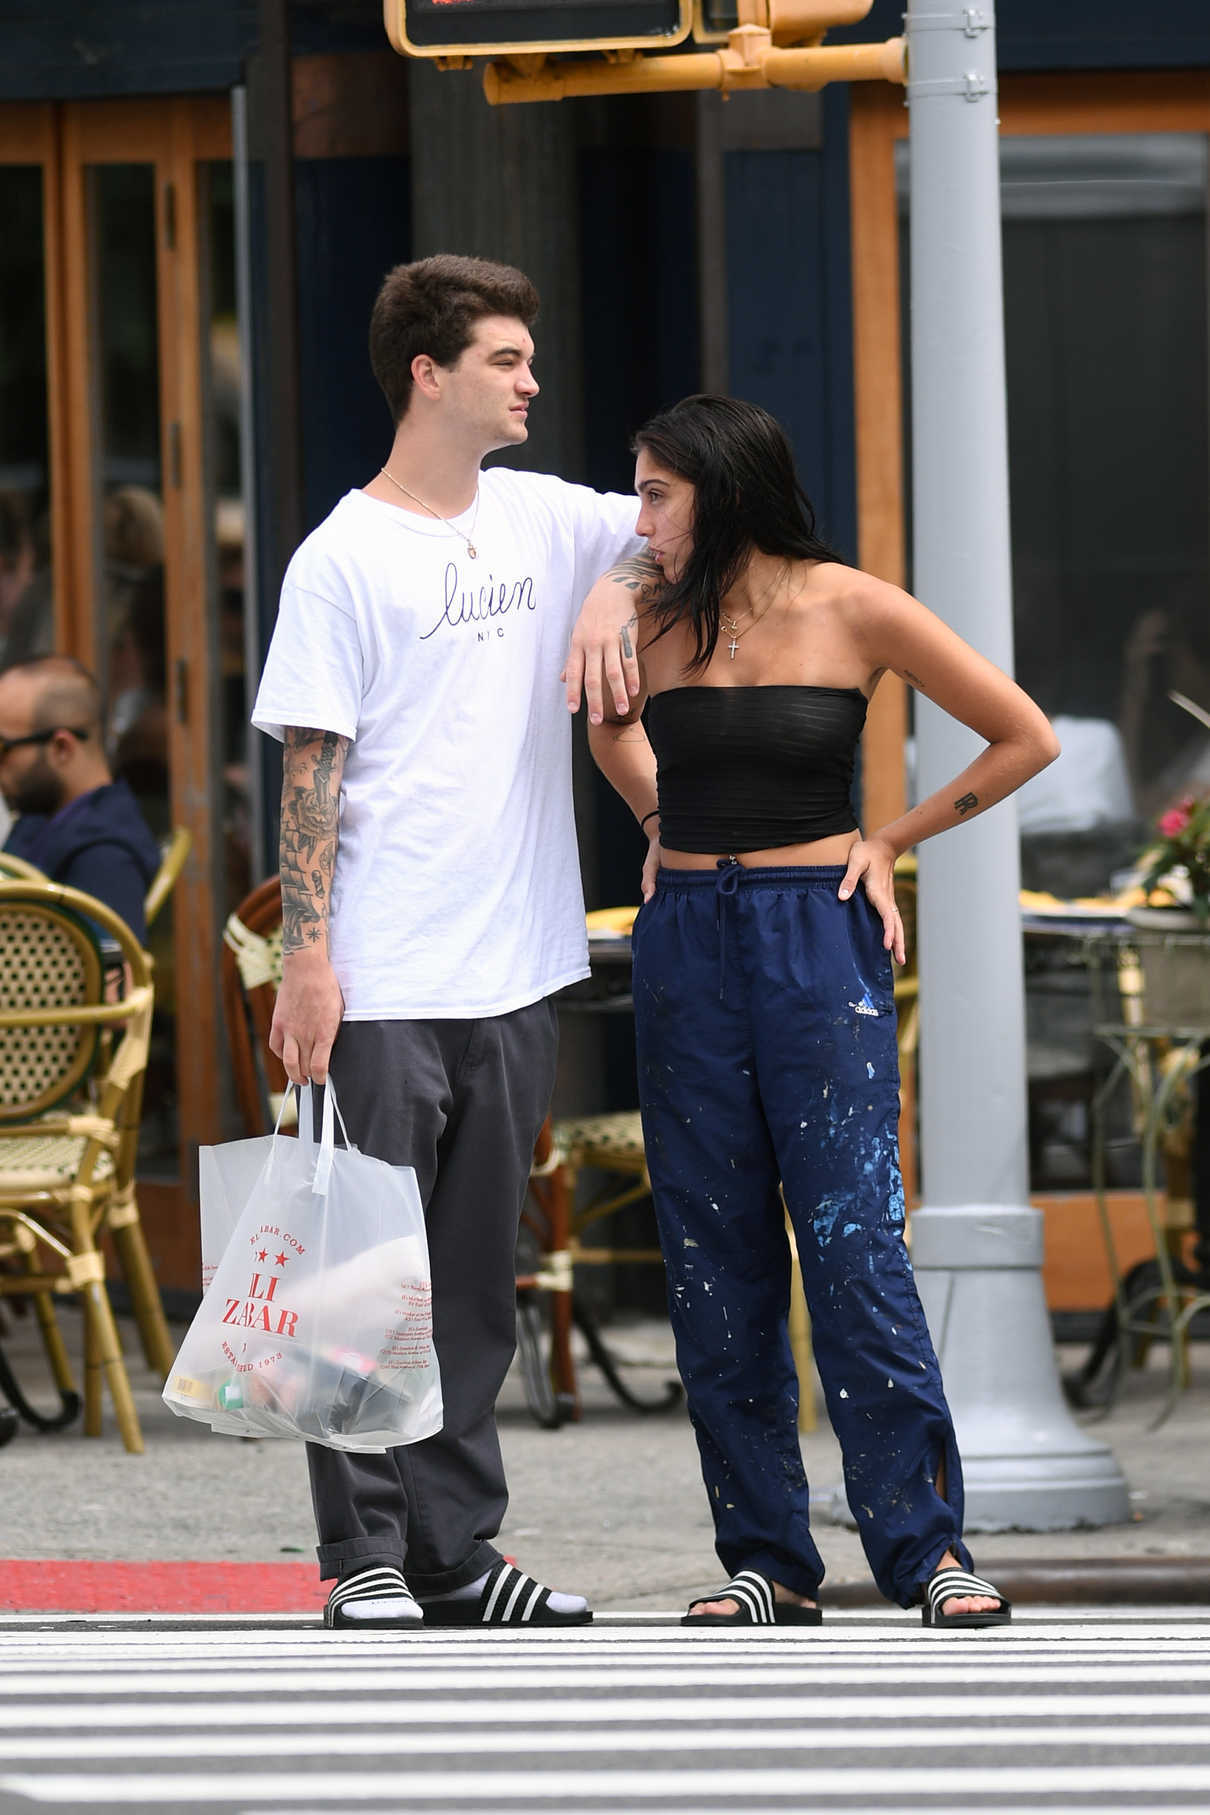 Lourdes Leon Goes Shopping With Her Boyfriend in the Upper East Side of NYC 08/08/2017-3